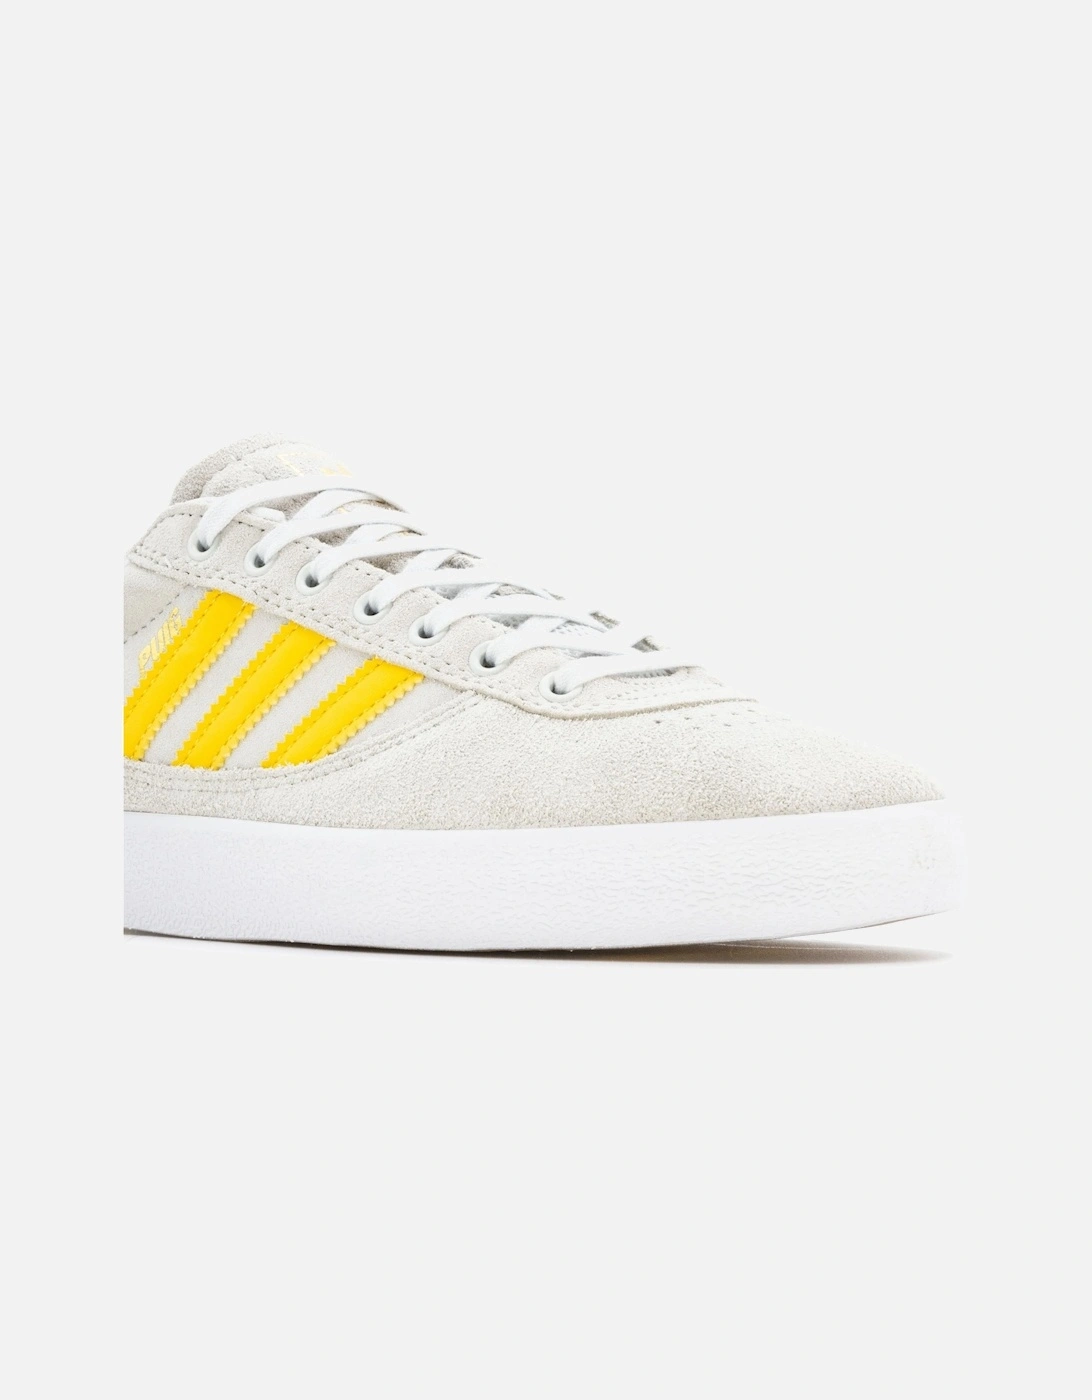 Puig Indoor Shoes - Crystal White/Bold Gold/Cloud White